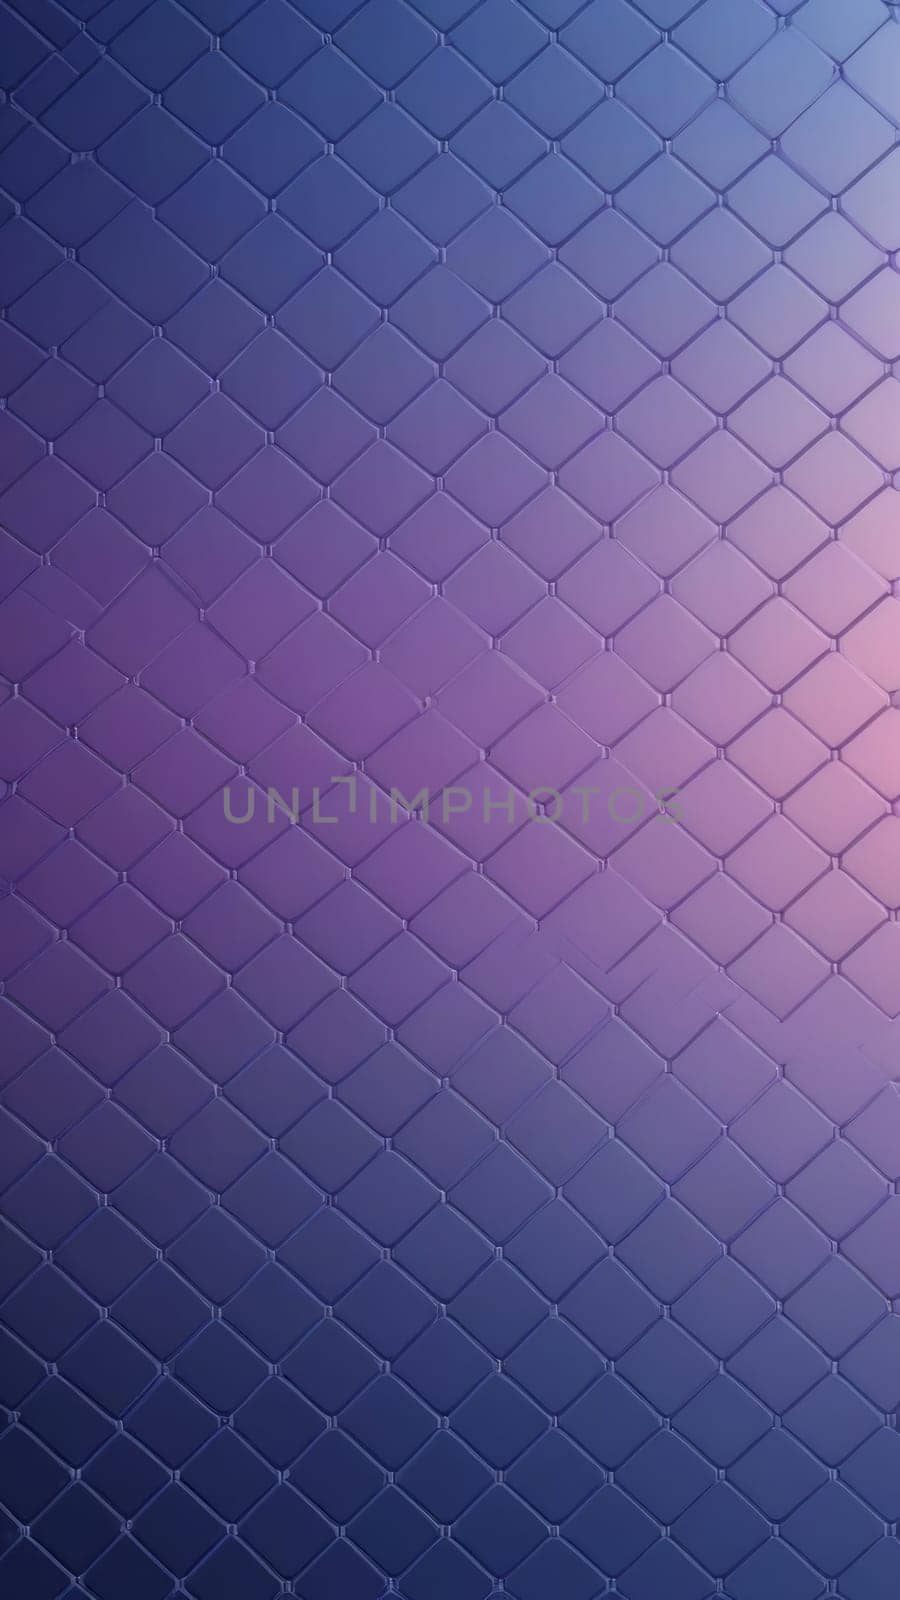 Screen background from Grid shapes and navy by nkotlyar